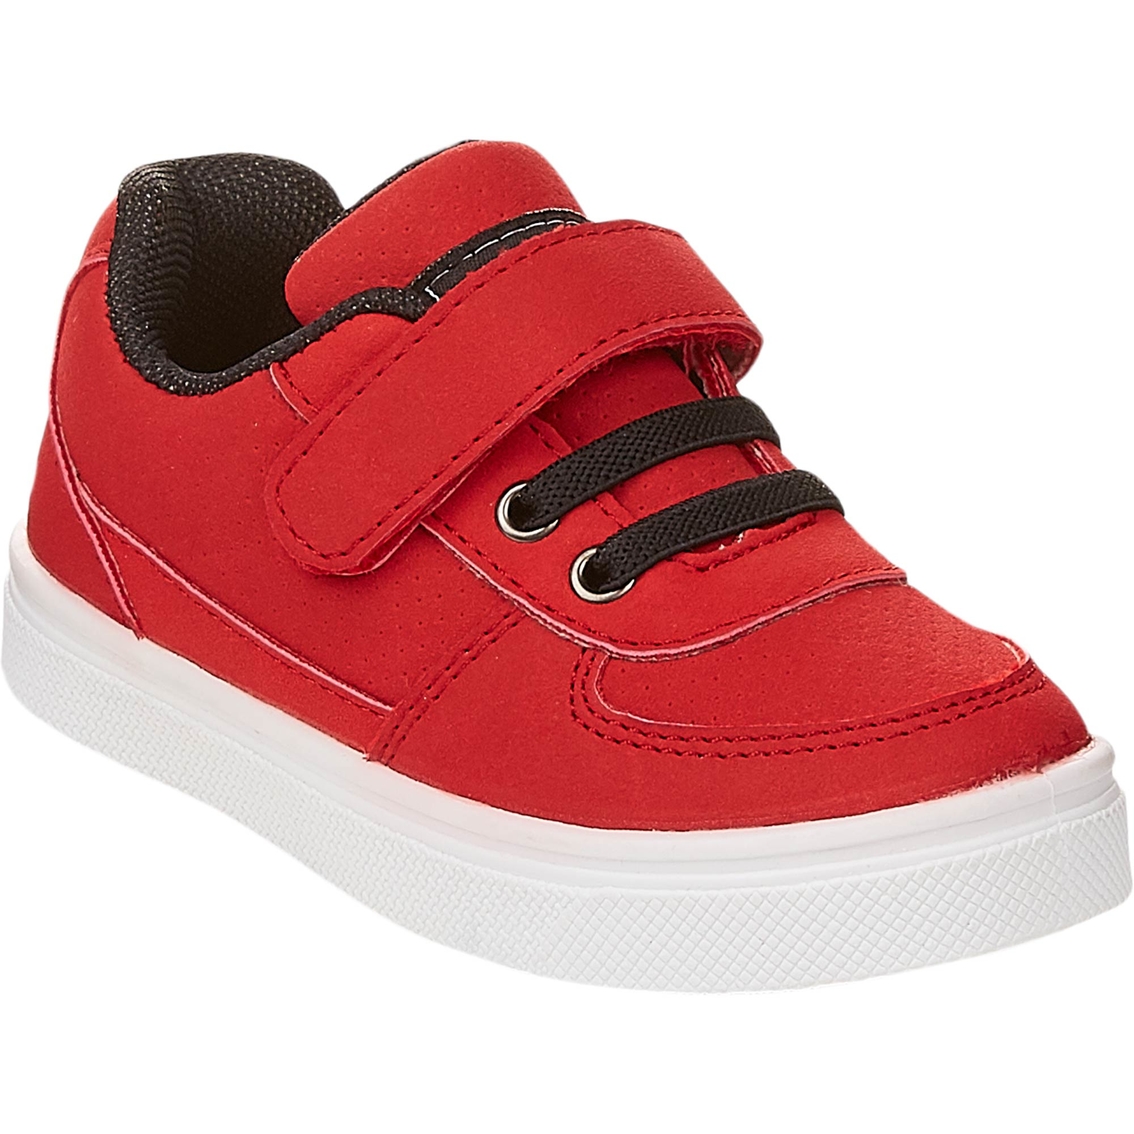 Oomphies Toddler Boys Ethan Sneakers | Sneakers | Shoes | Shop The Exchange